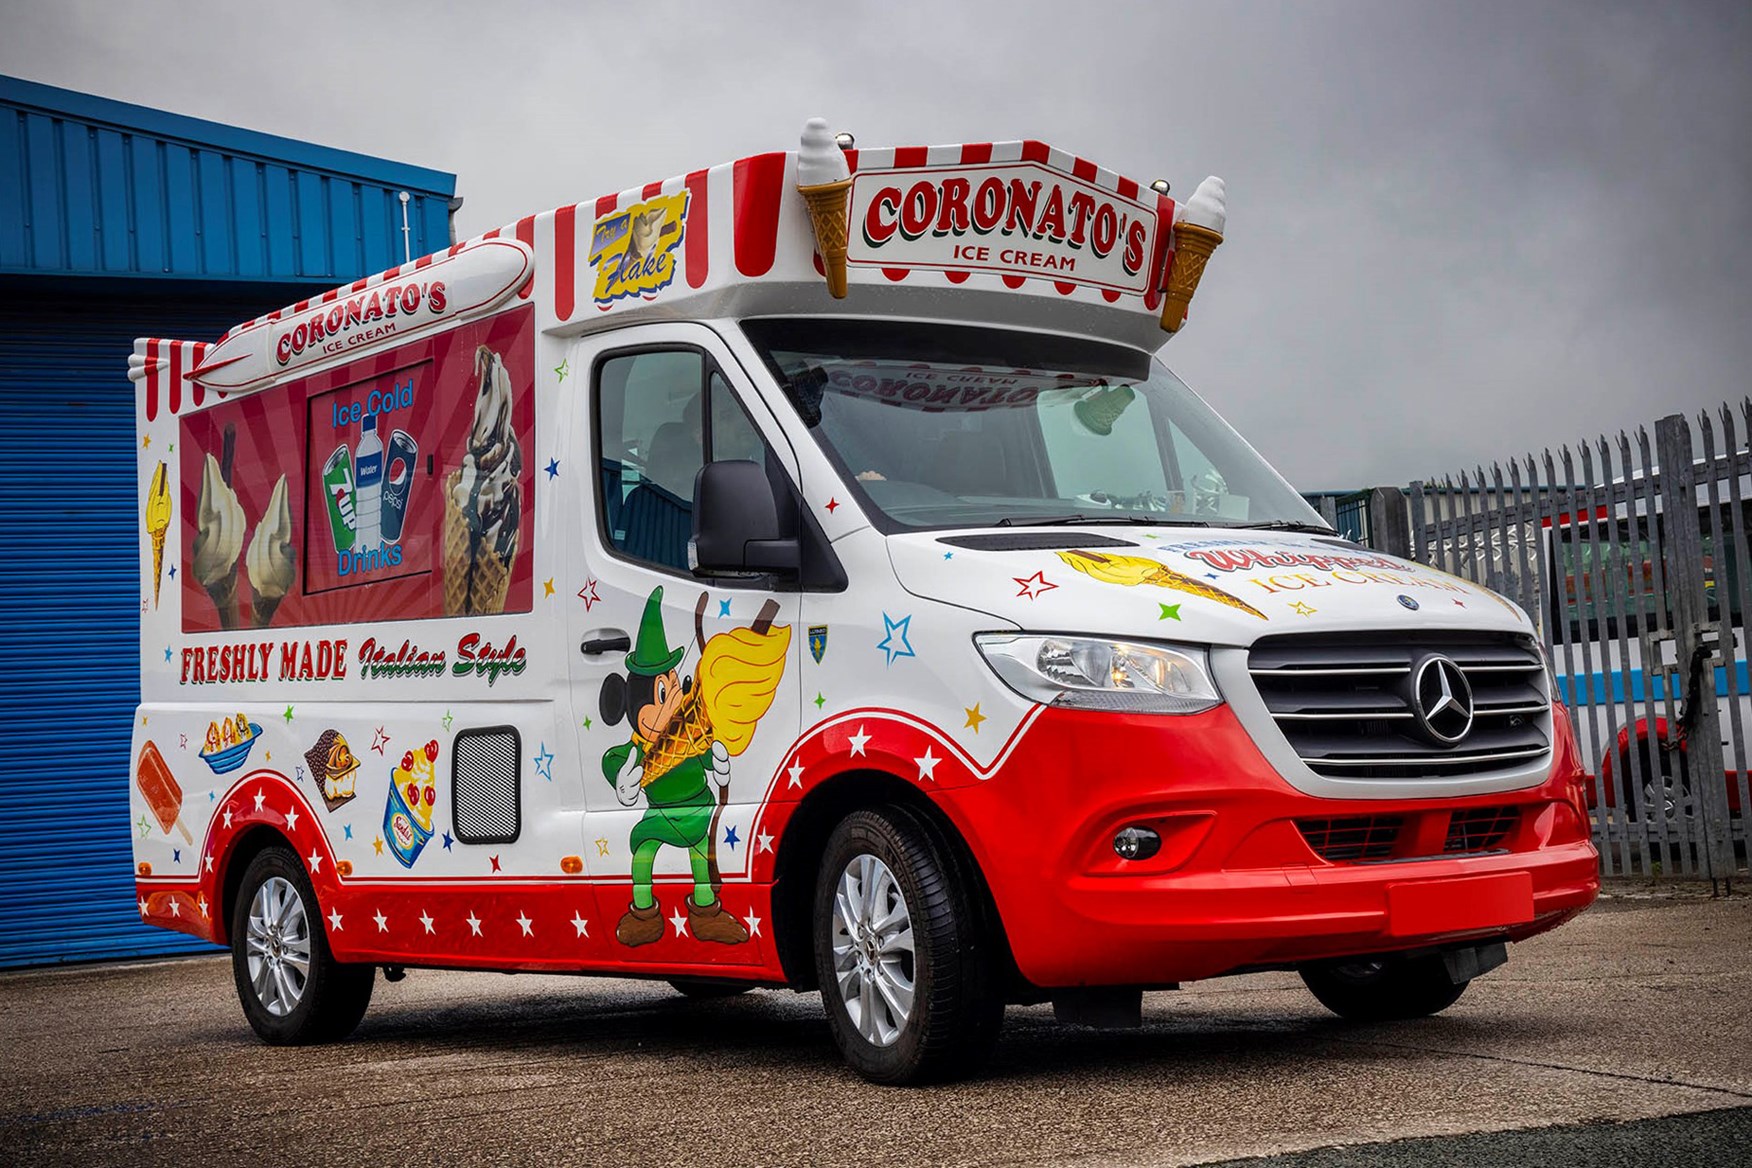 The ultimate ice cream van? Try an £85k 